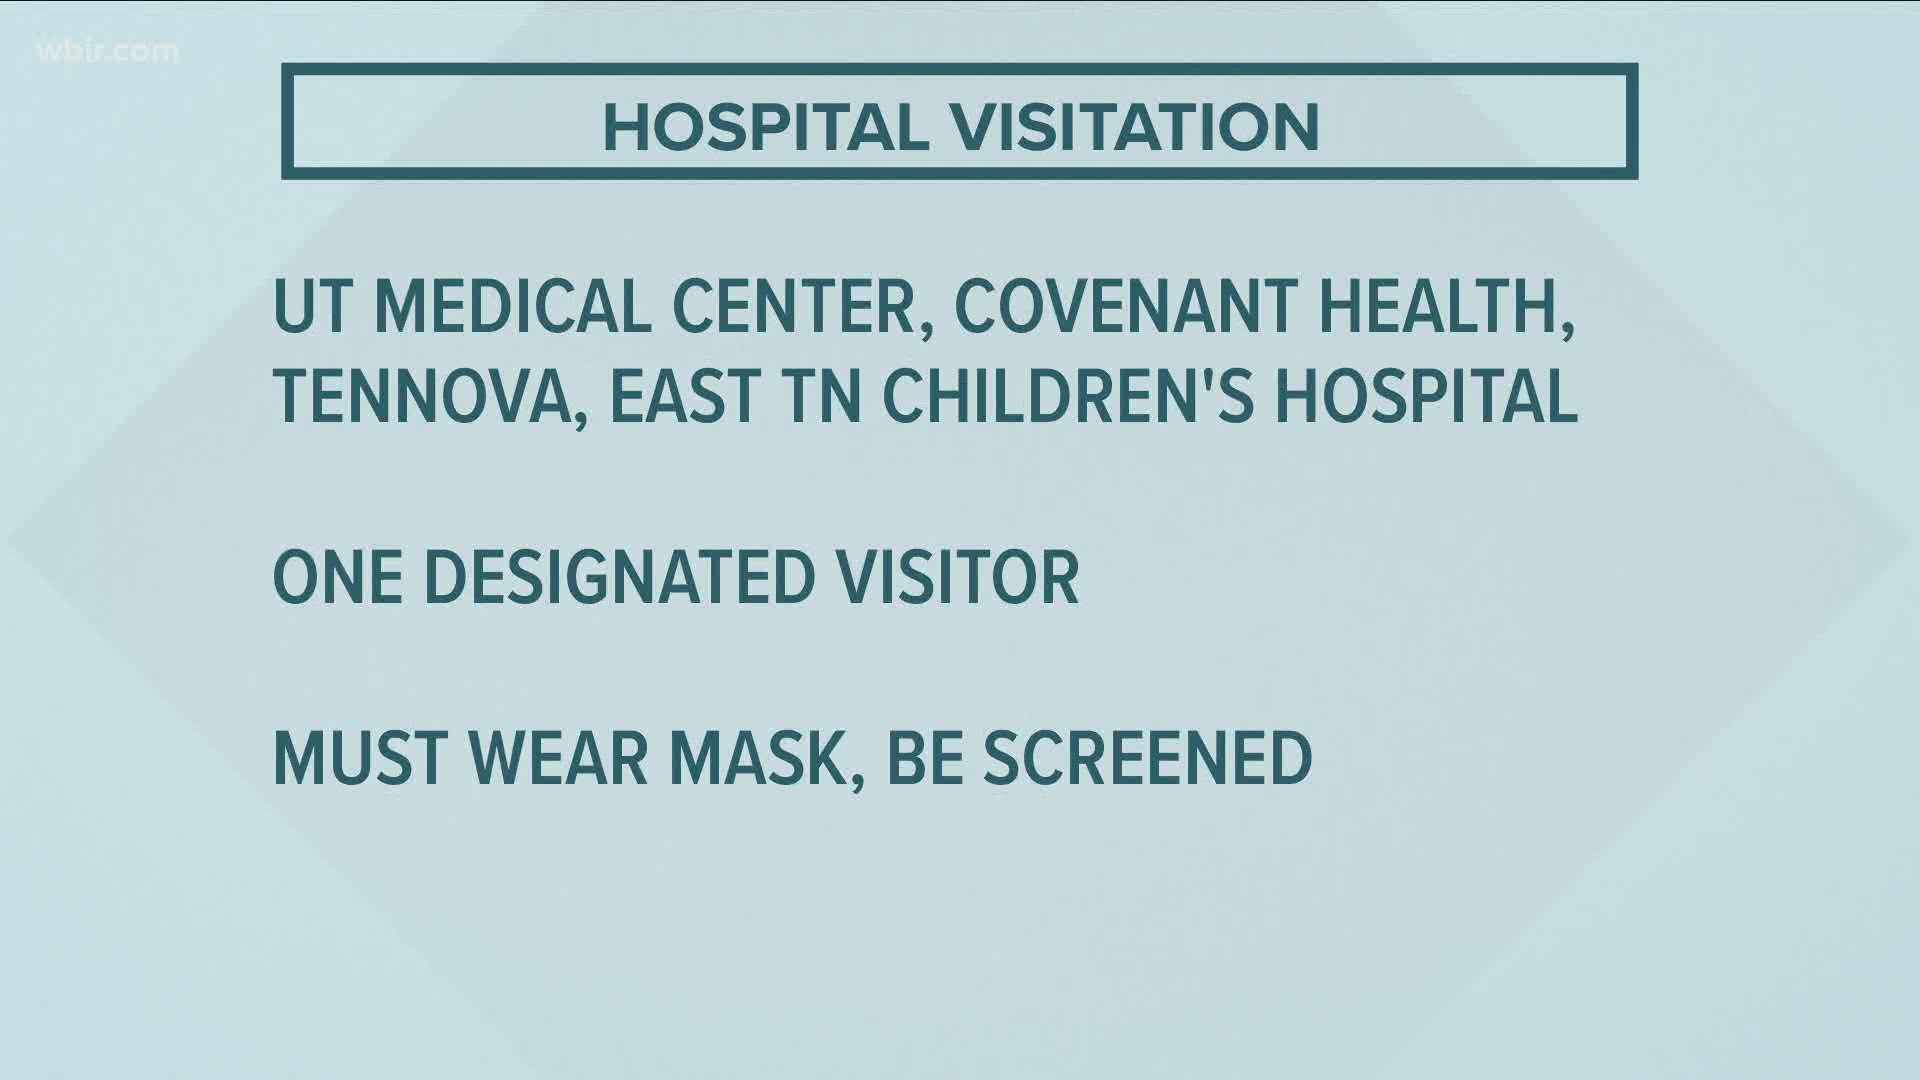 The four major hospital groups in Knoxville are updating visitor policies due to rising COVID-19 cases.